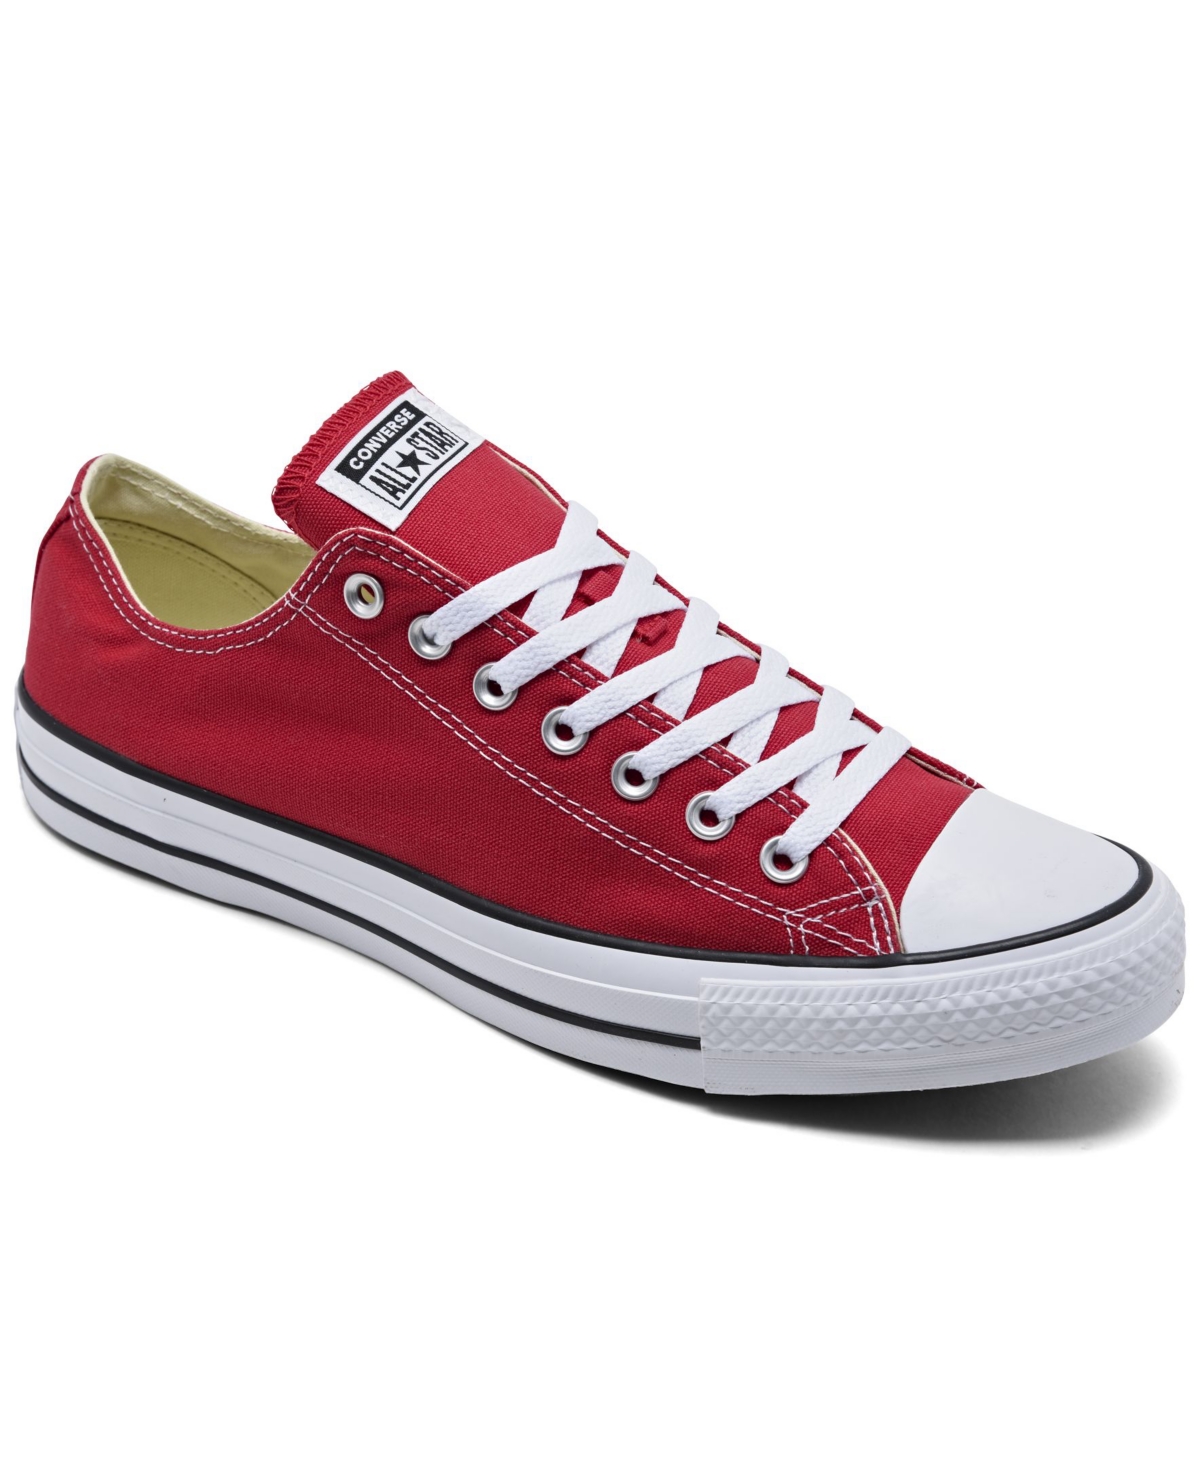 UPC 022859566667 product image for Converse Men's Chuck Taylor Low Top Sneakers from Finish Line | upcitemdb.com